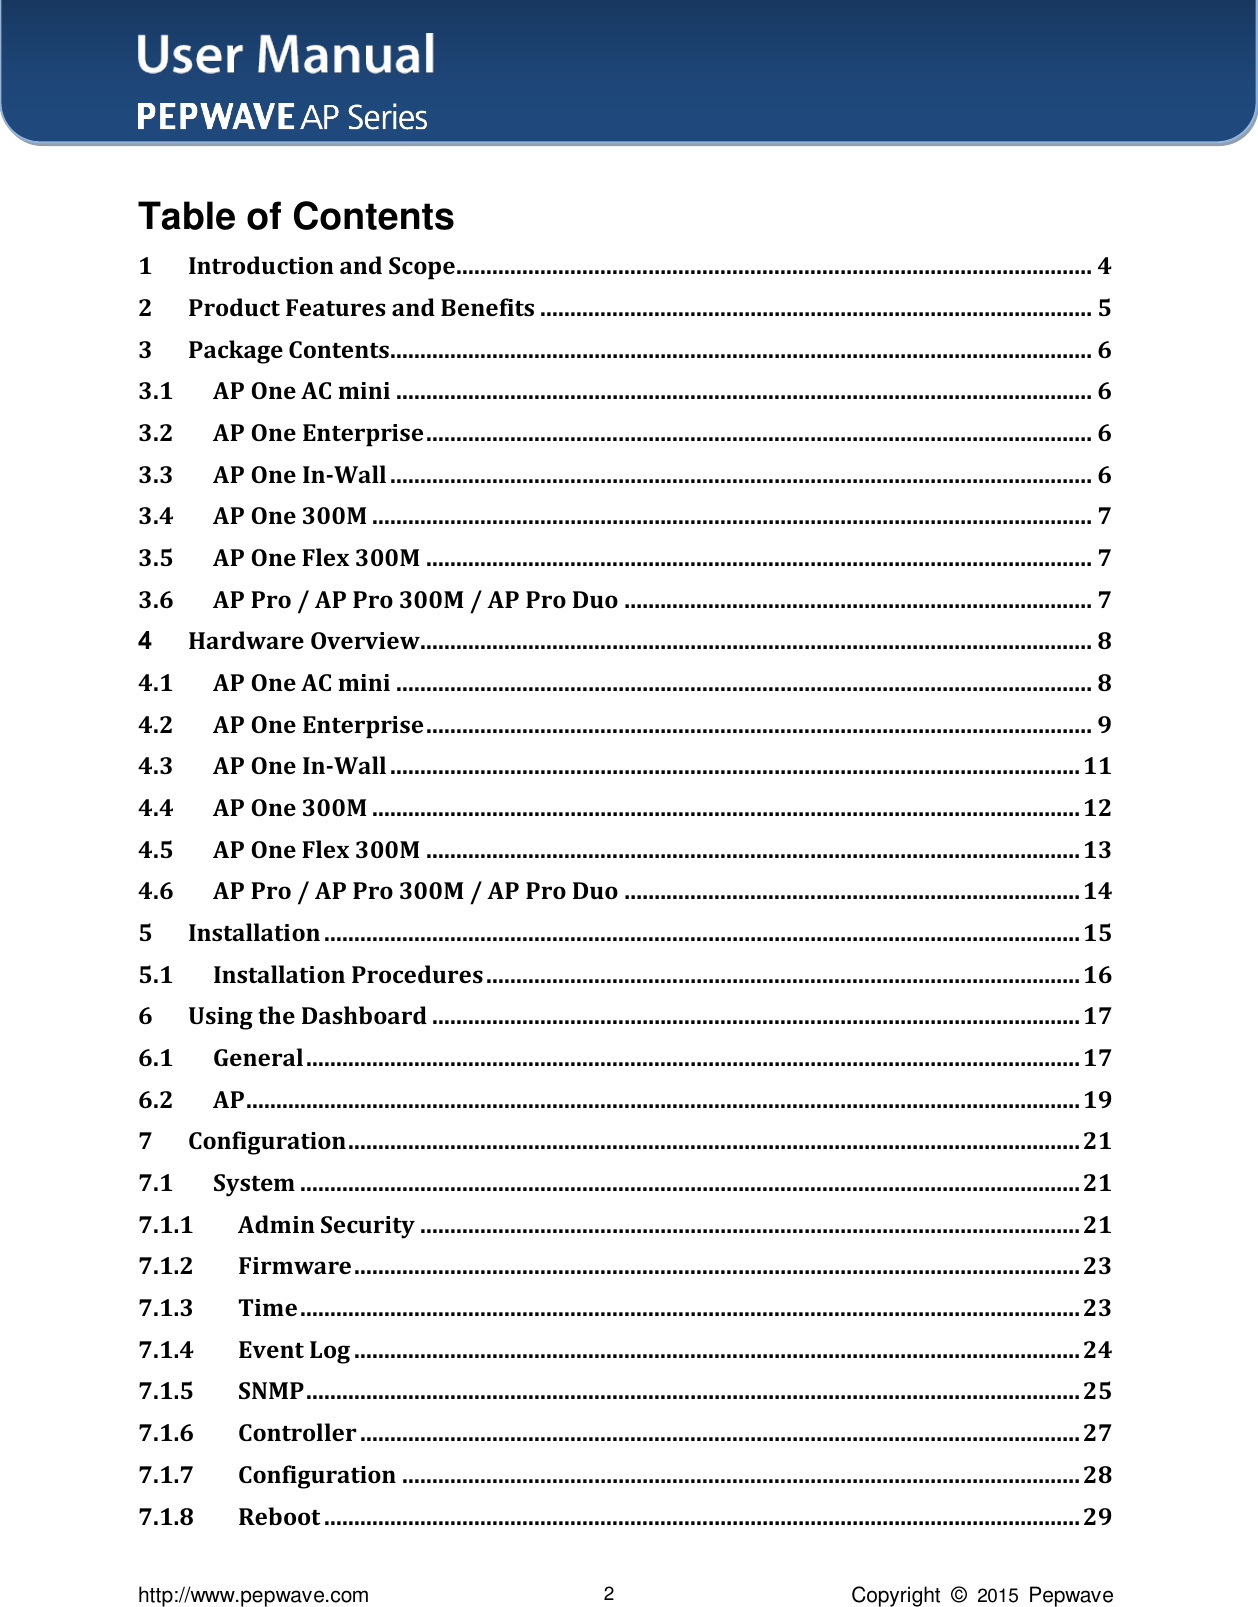 User Manual    http://www.pepwave.com 2 Copyright  ©  2015  Pepwave Table of Contents 1 Introduction and Scope.......................................................................................................... 4 2 Product Features and Benefits ............................................................................................ 5 3 Package Contents..................................................................................................................... 6 3.1 AP One AC mini .................................................................................................................... 6 3.2 AP One Enterprise ............................................................................................................... 6 3.3 AP One In-Wall ..................................................................................................................... 6 3.4 AP One 300M ........................................................................................................................ 7 3.5 AP One Flex 300M ............................................................................................................... 7 3.6 AP Pro / AP Pro 300M / AP Pro Duo .............................................................................. 7 4 Hardware Overview ................................................................................................................ 8 4.1 AP One AC mini .................................................................................................................... 8 4.2 AP One Enterprise ............................................................................................................... 9 4.3 AP One In-Wall ................................................................................................................... 11 4.4 AP One 300M ...................................................................................................................... 12 4.5 AP One Flex 300M ............................................................................................................. 13 4.6 AP Pro / AP Pro 300M / AP Pro Duo ............................................................................ 14 5 Installation .............................................................................................................................. 15 5.1 Installation Procedures ................................................................................................... 16 6 Using the Dashboard ............................................................................................................ 17 6.1 General ................................................................................................................................. 17 6.2 AP ........................................................................................................................................... 19 7 Configuration .......................................................................................................................... 21 7.1 System .................................................................................................................................. 21 7.1.1 Admin Security .............................................................................................................. 21 7.1.2 Firmware ......................................................................................................................... 23 7.1.3 Time .................................................................................................................................. 23 7.1.4 Event Log ......................................................................................................................... 24 7.1.5 SNMP ................................................................................................................................. 25 7.1.6 Controller ........................................................................................................................ 27 7.1.7 Configuration ................................................................................................................. 28 7.1.8 Reboot .............................................................................................................................. 29 